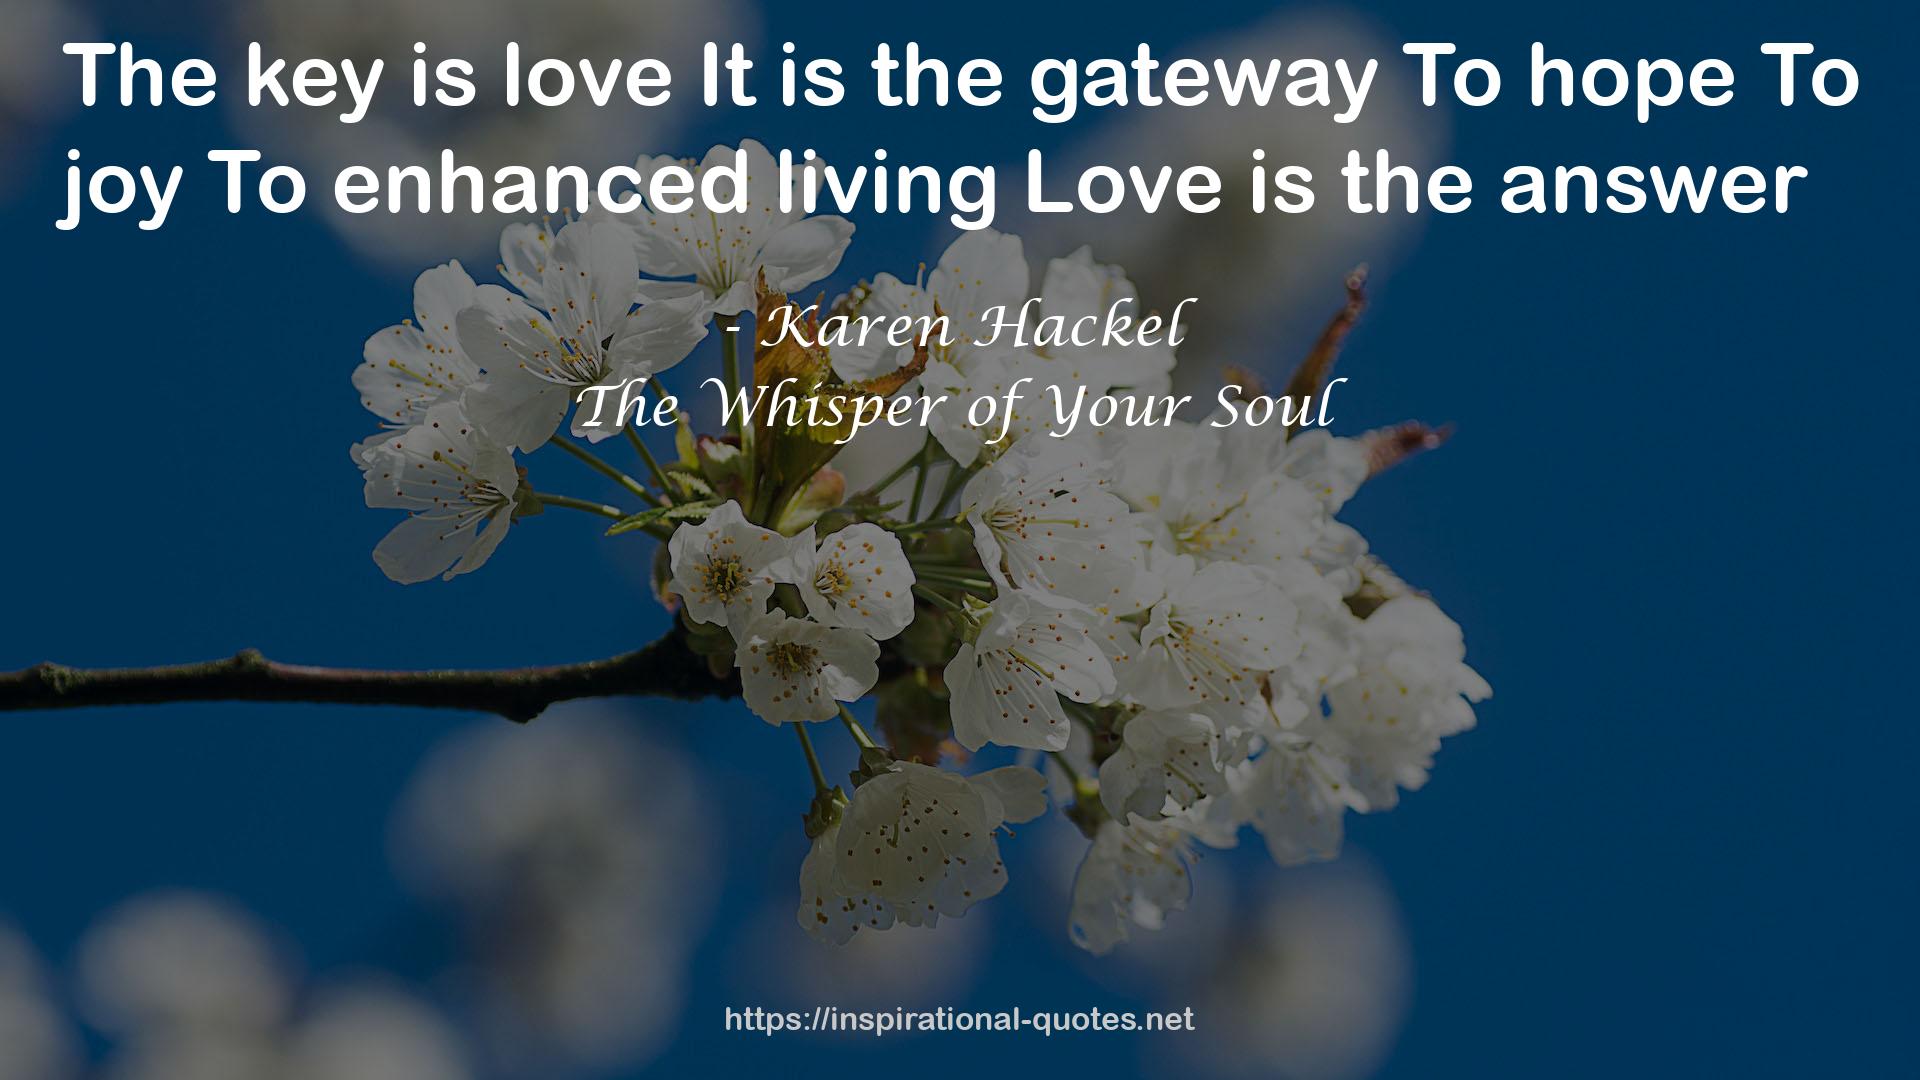 livingLove  QUOTES